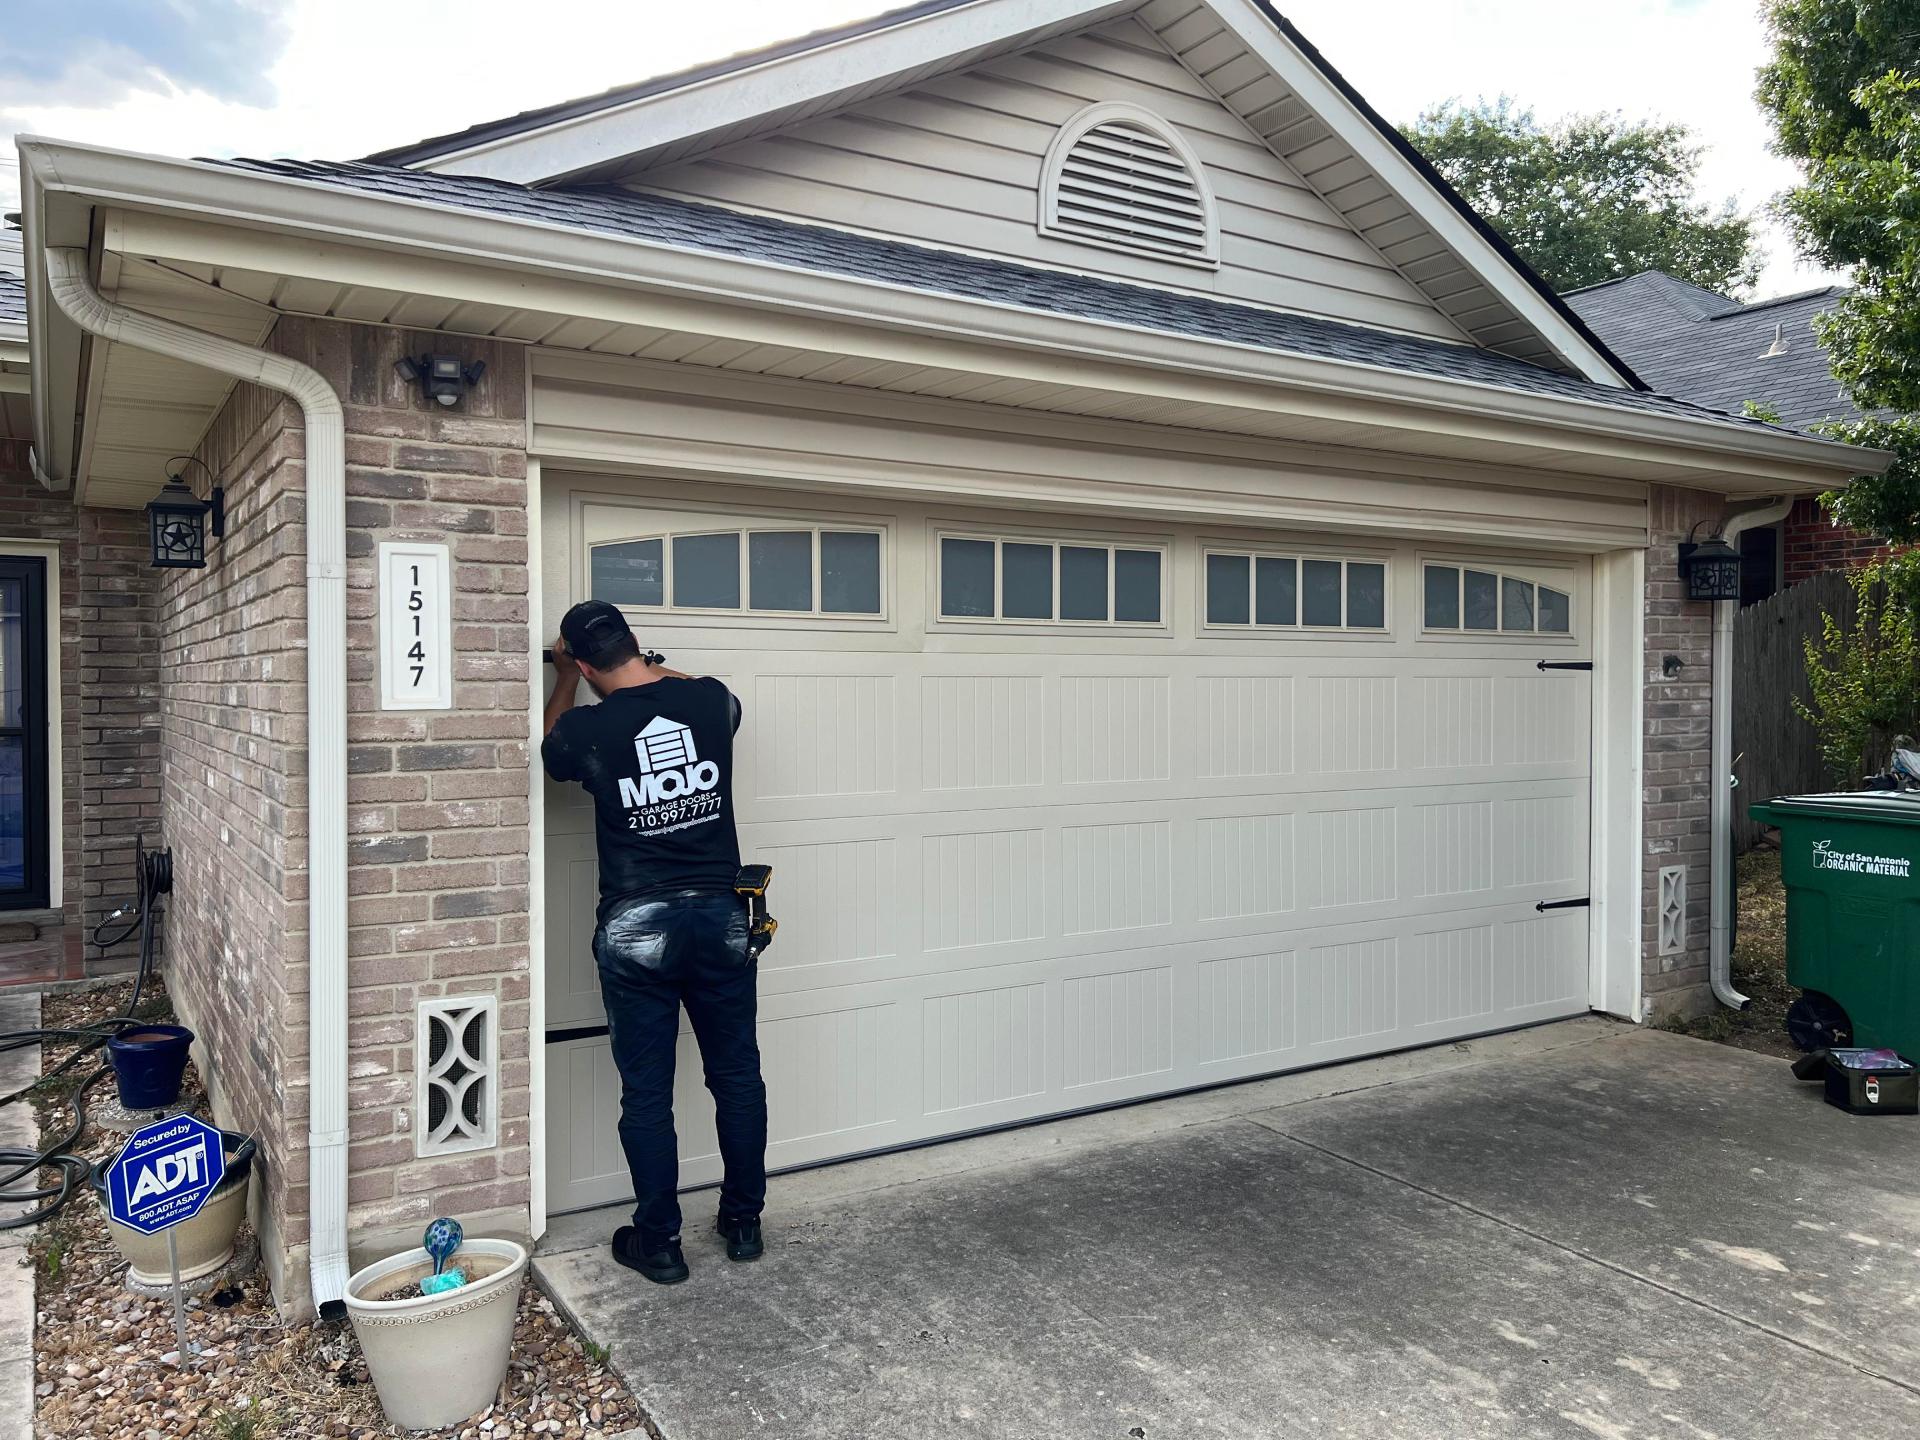 Revolutionizing Home Security: Premier Garage Door Repair Services Now Available